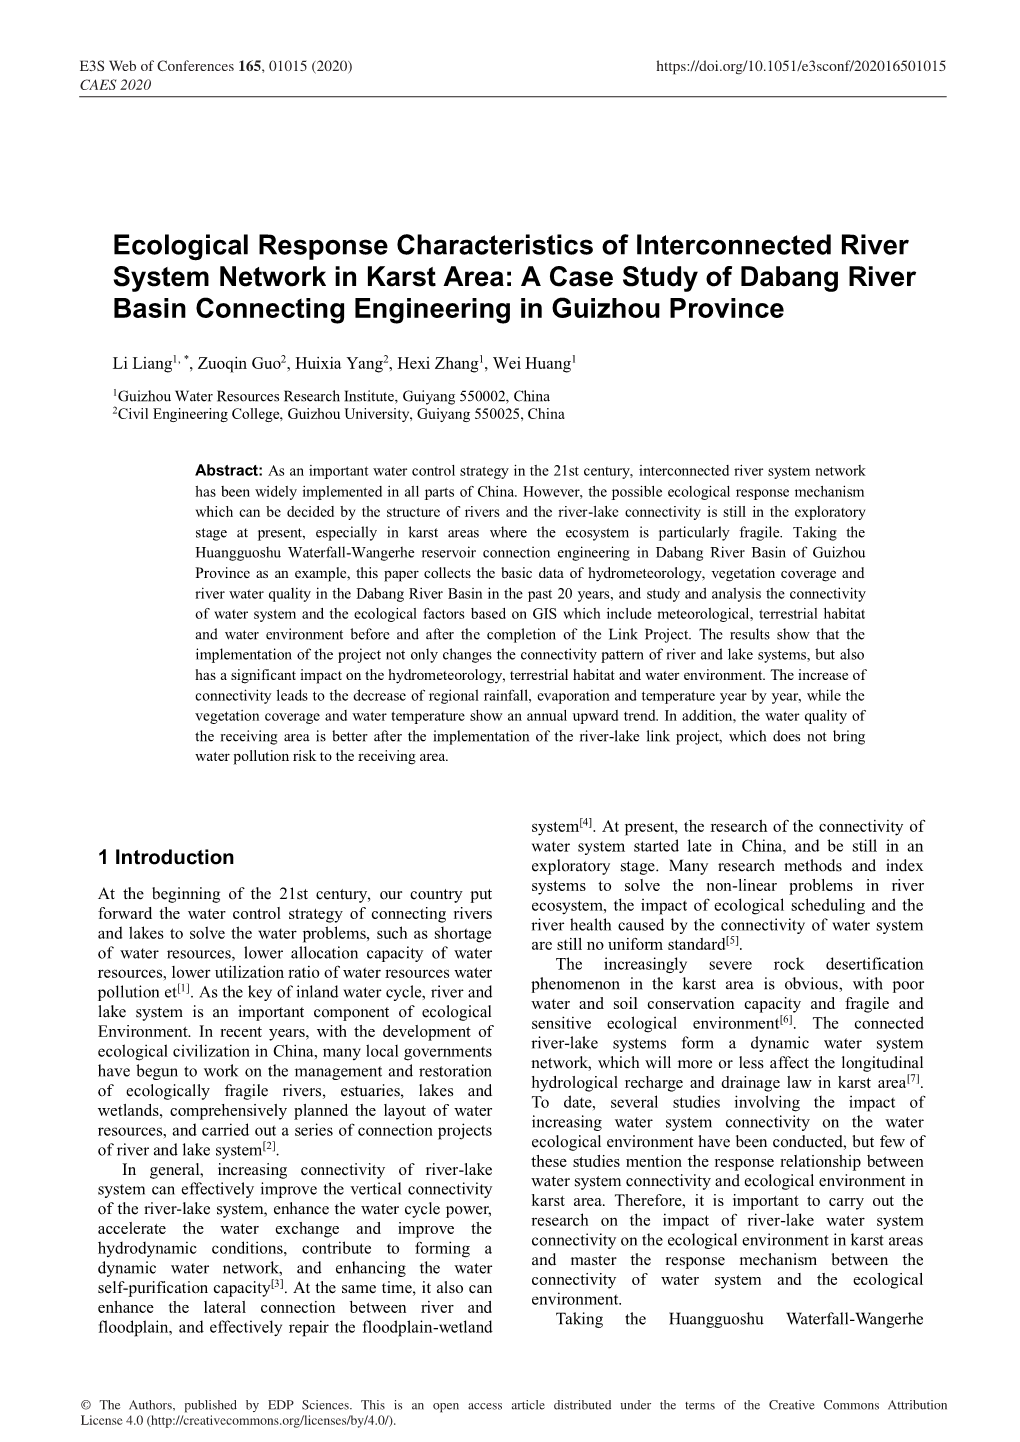 Ecological Response Characteristics of Interconnected River System